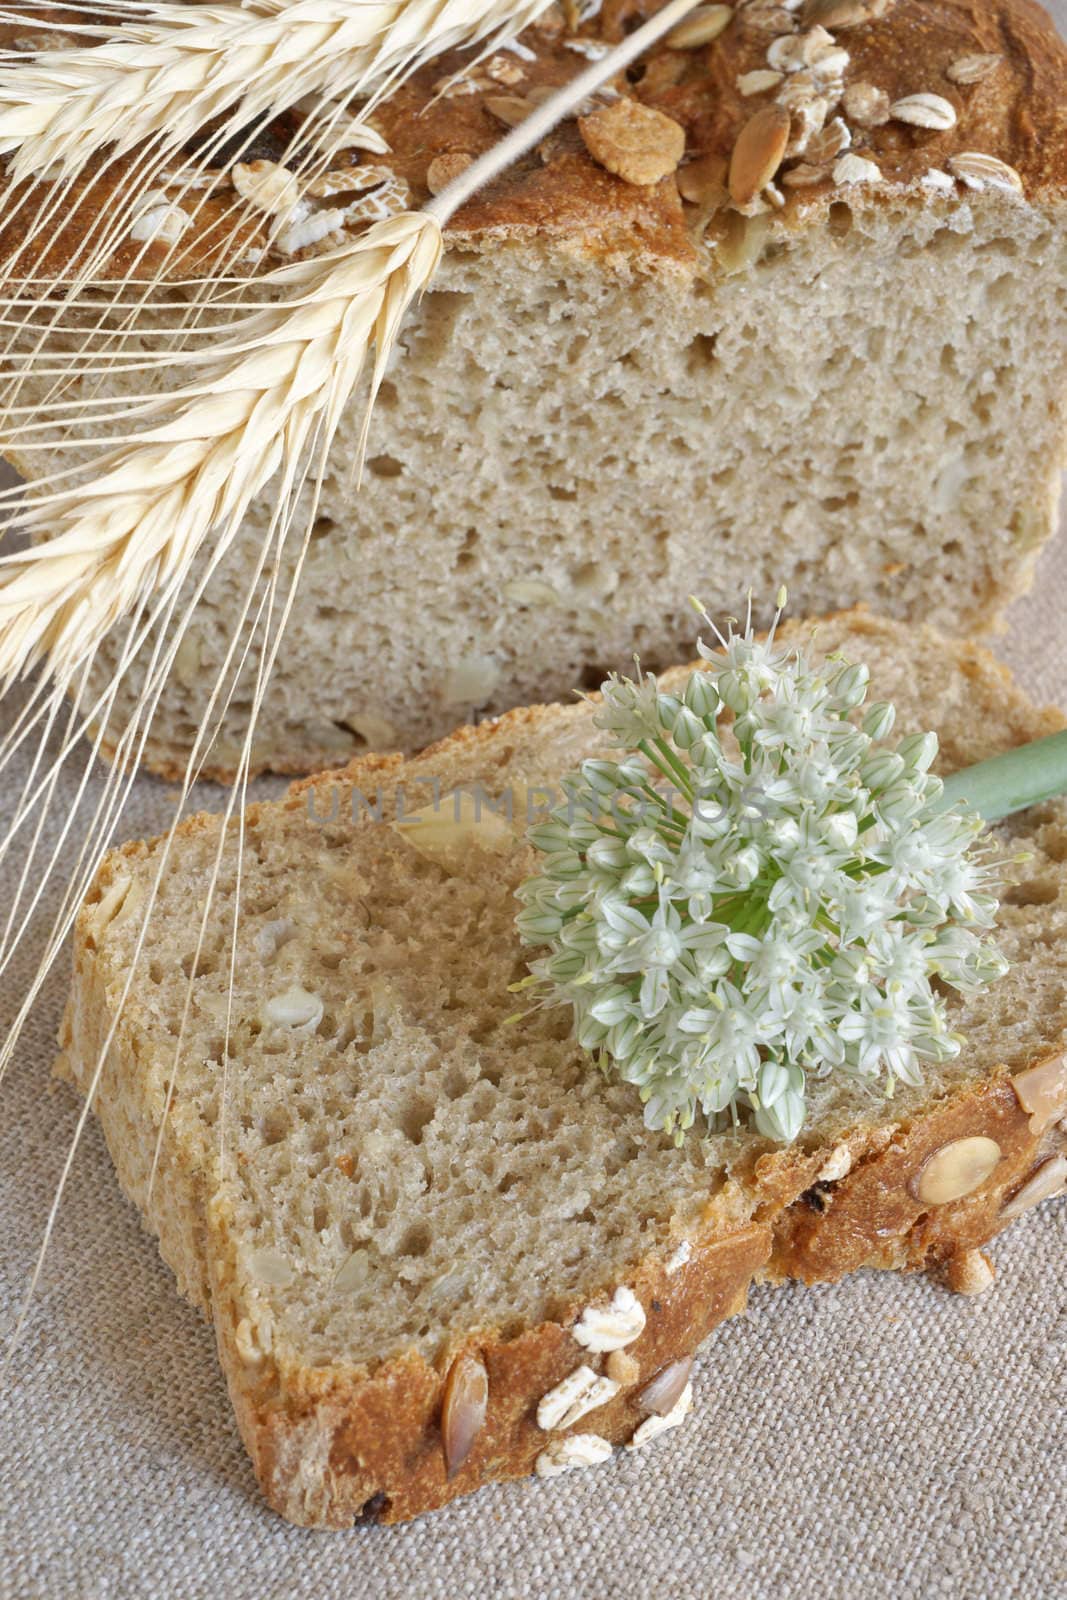 Slice of oniony bread with onion flower and spikes